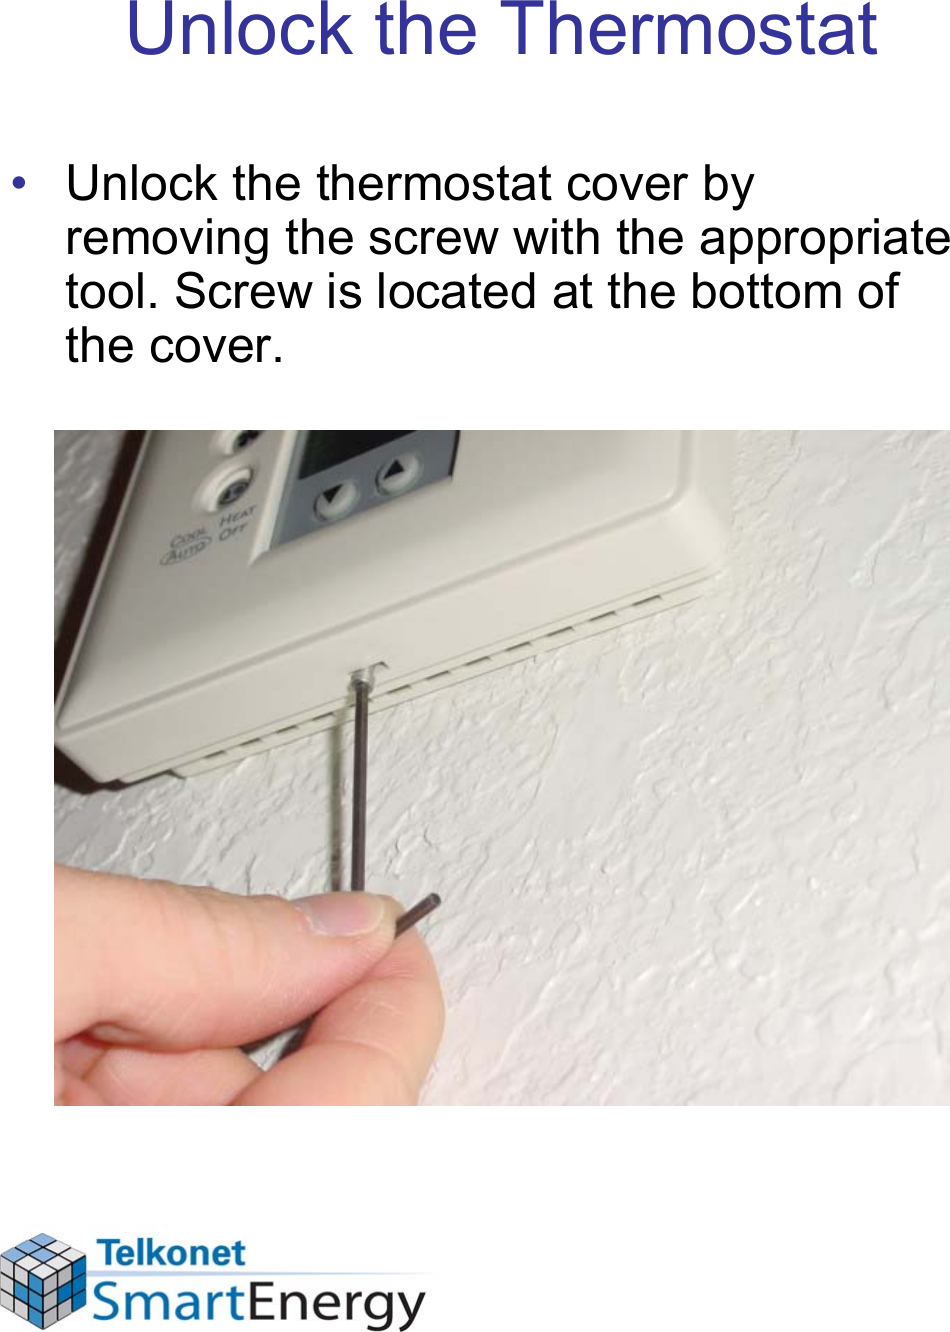 Unlock the Thermostat• Unlock the thermostat cover by removing the screw with the appropriate tool. Screw is located at the bottom of the cover.